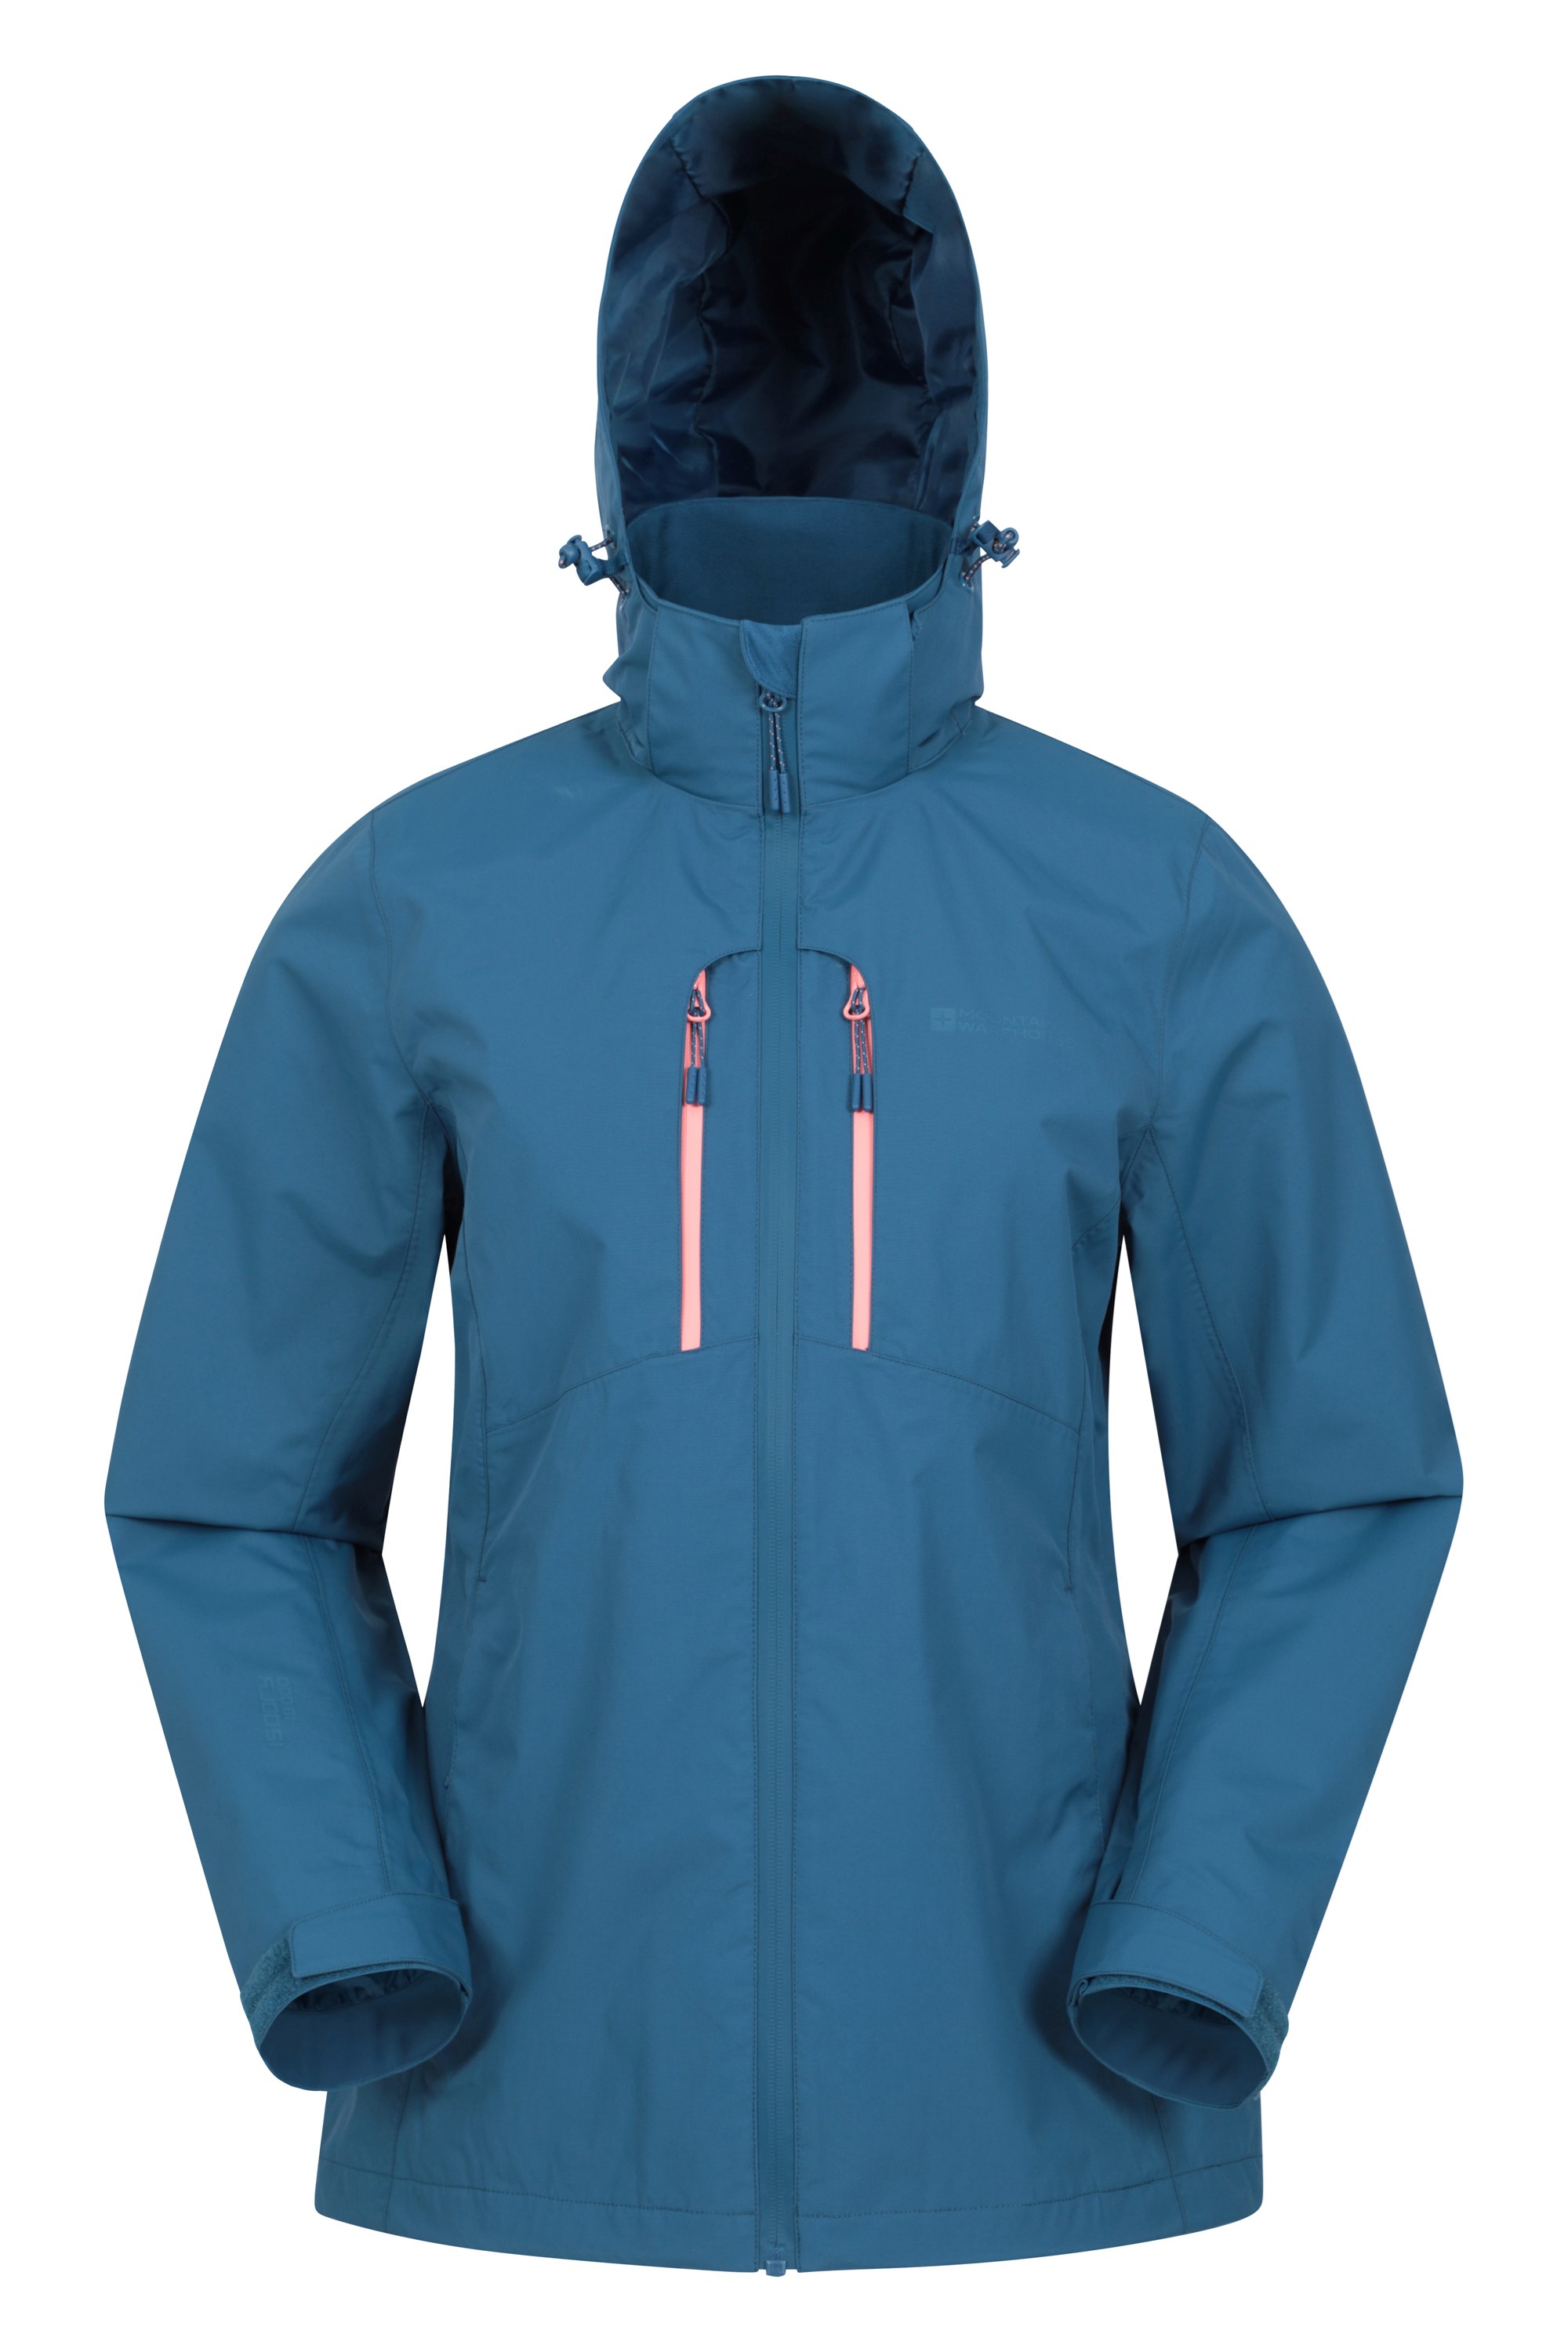 How to Reproof a Waterproof Jacket | Mountain Warehouse US